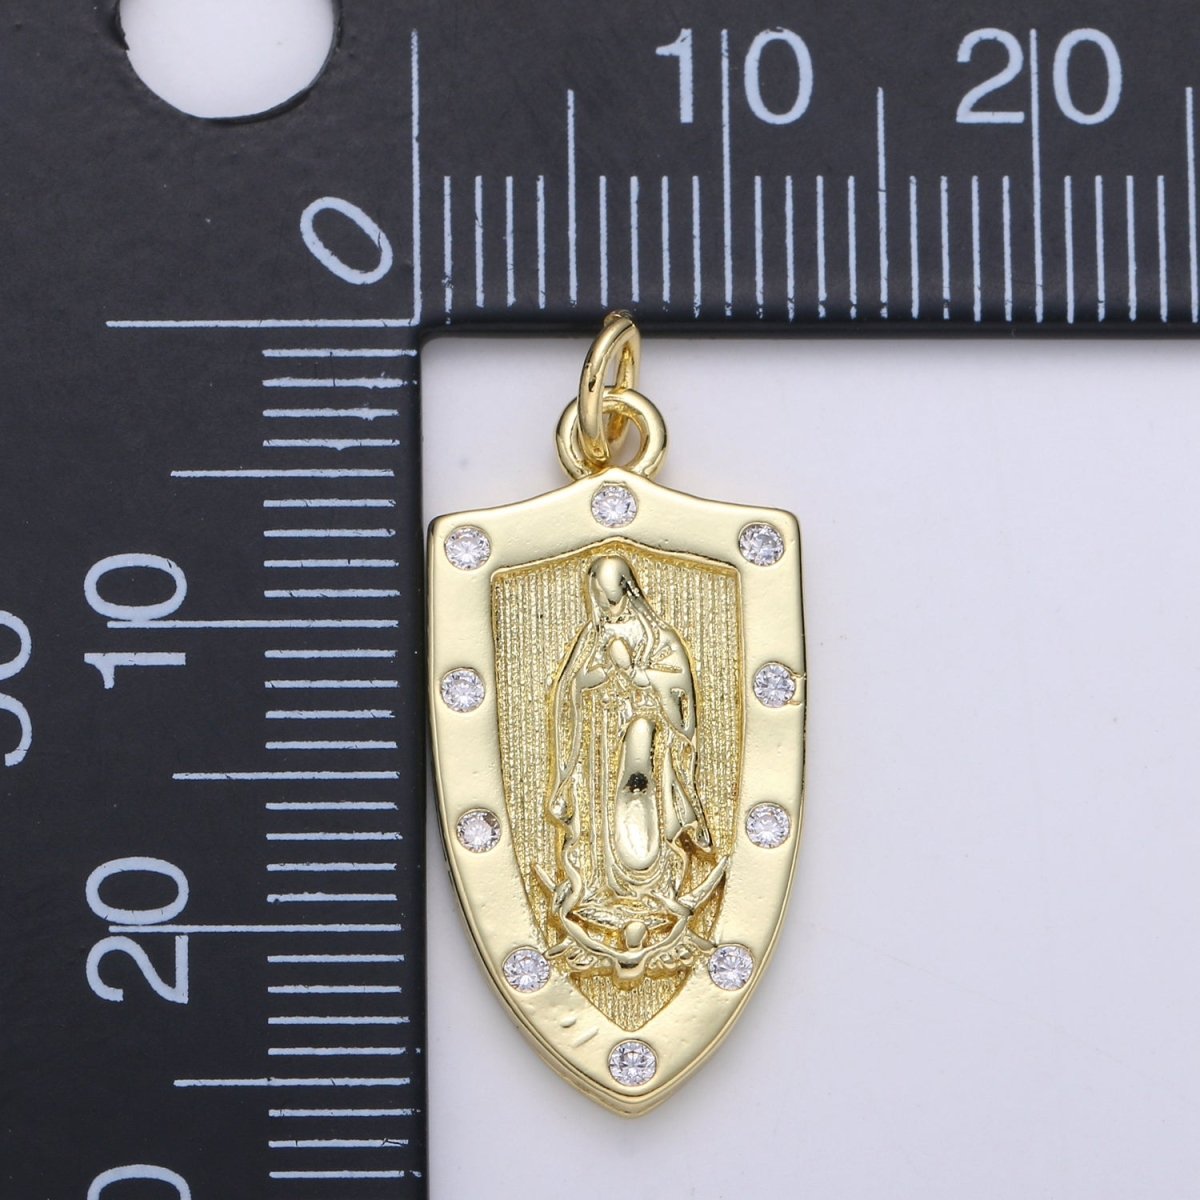 Dainty 14K Gold Filled Virgin Mother Mary Charm Antique Style Vintage lady guadalupe Pendant Gold Shield Medallion Charm Reliigous Jewelry,E-108 - DLUXCA